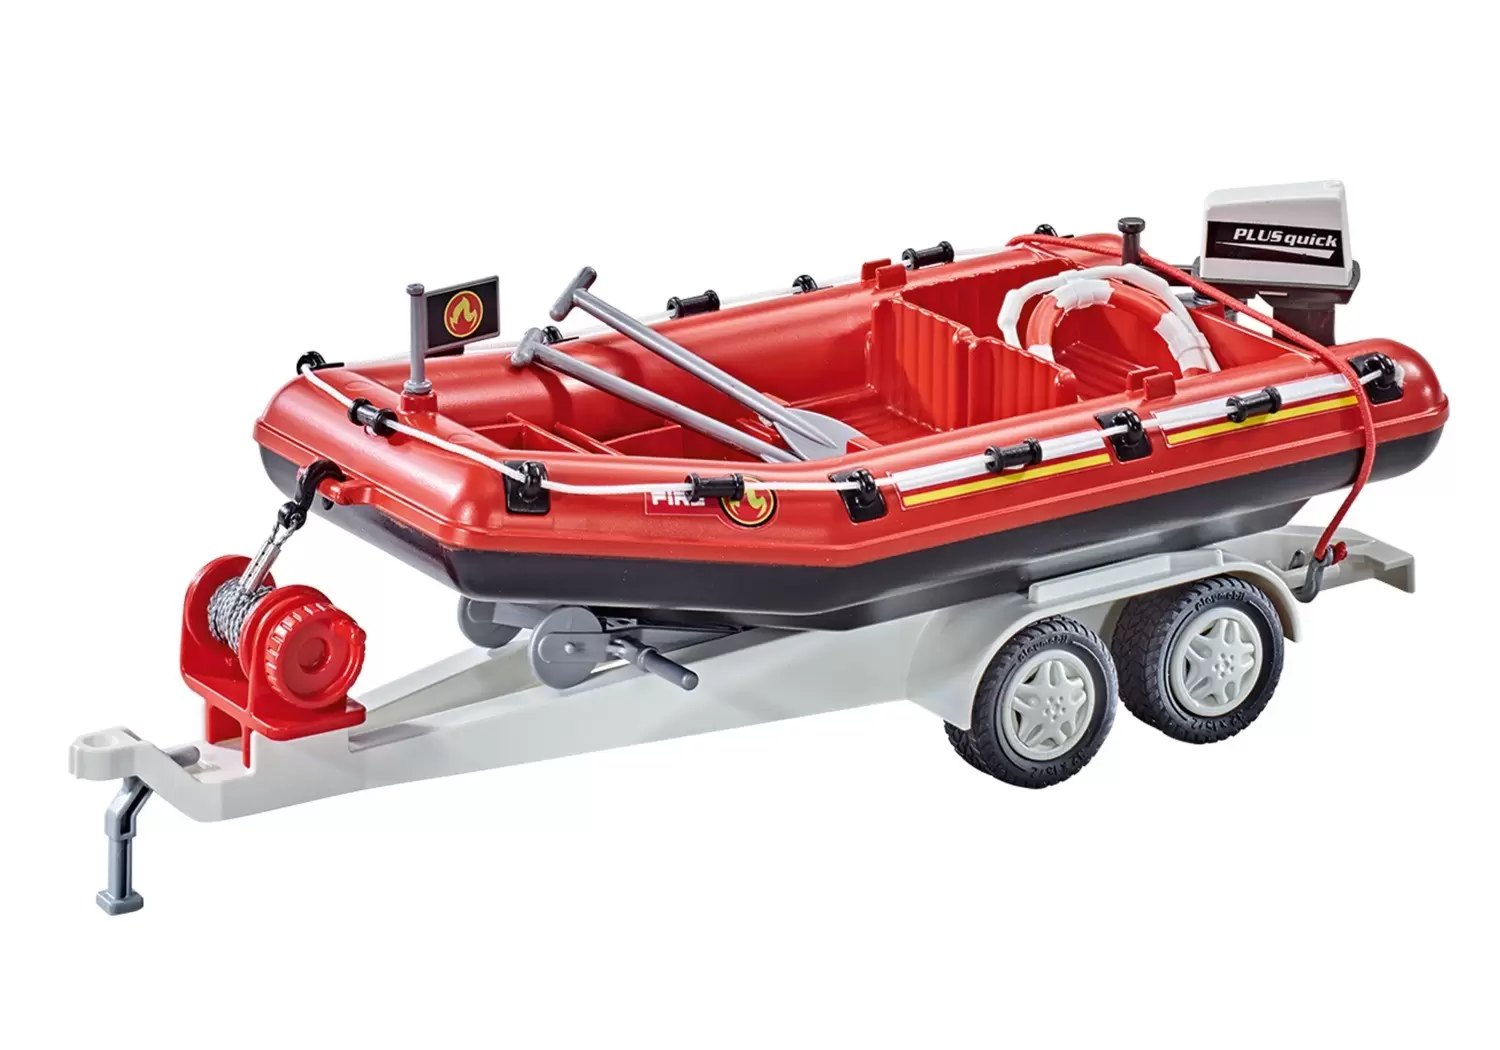 Playmobil Firemen - Firefighting Inflatable Boat with Trailer